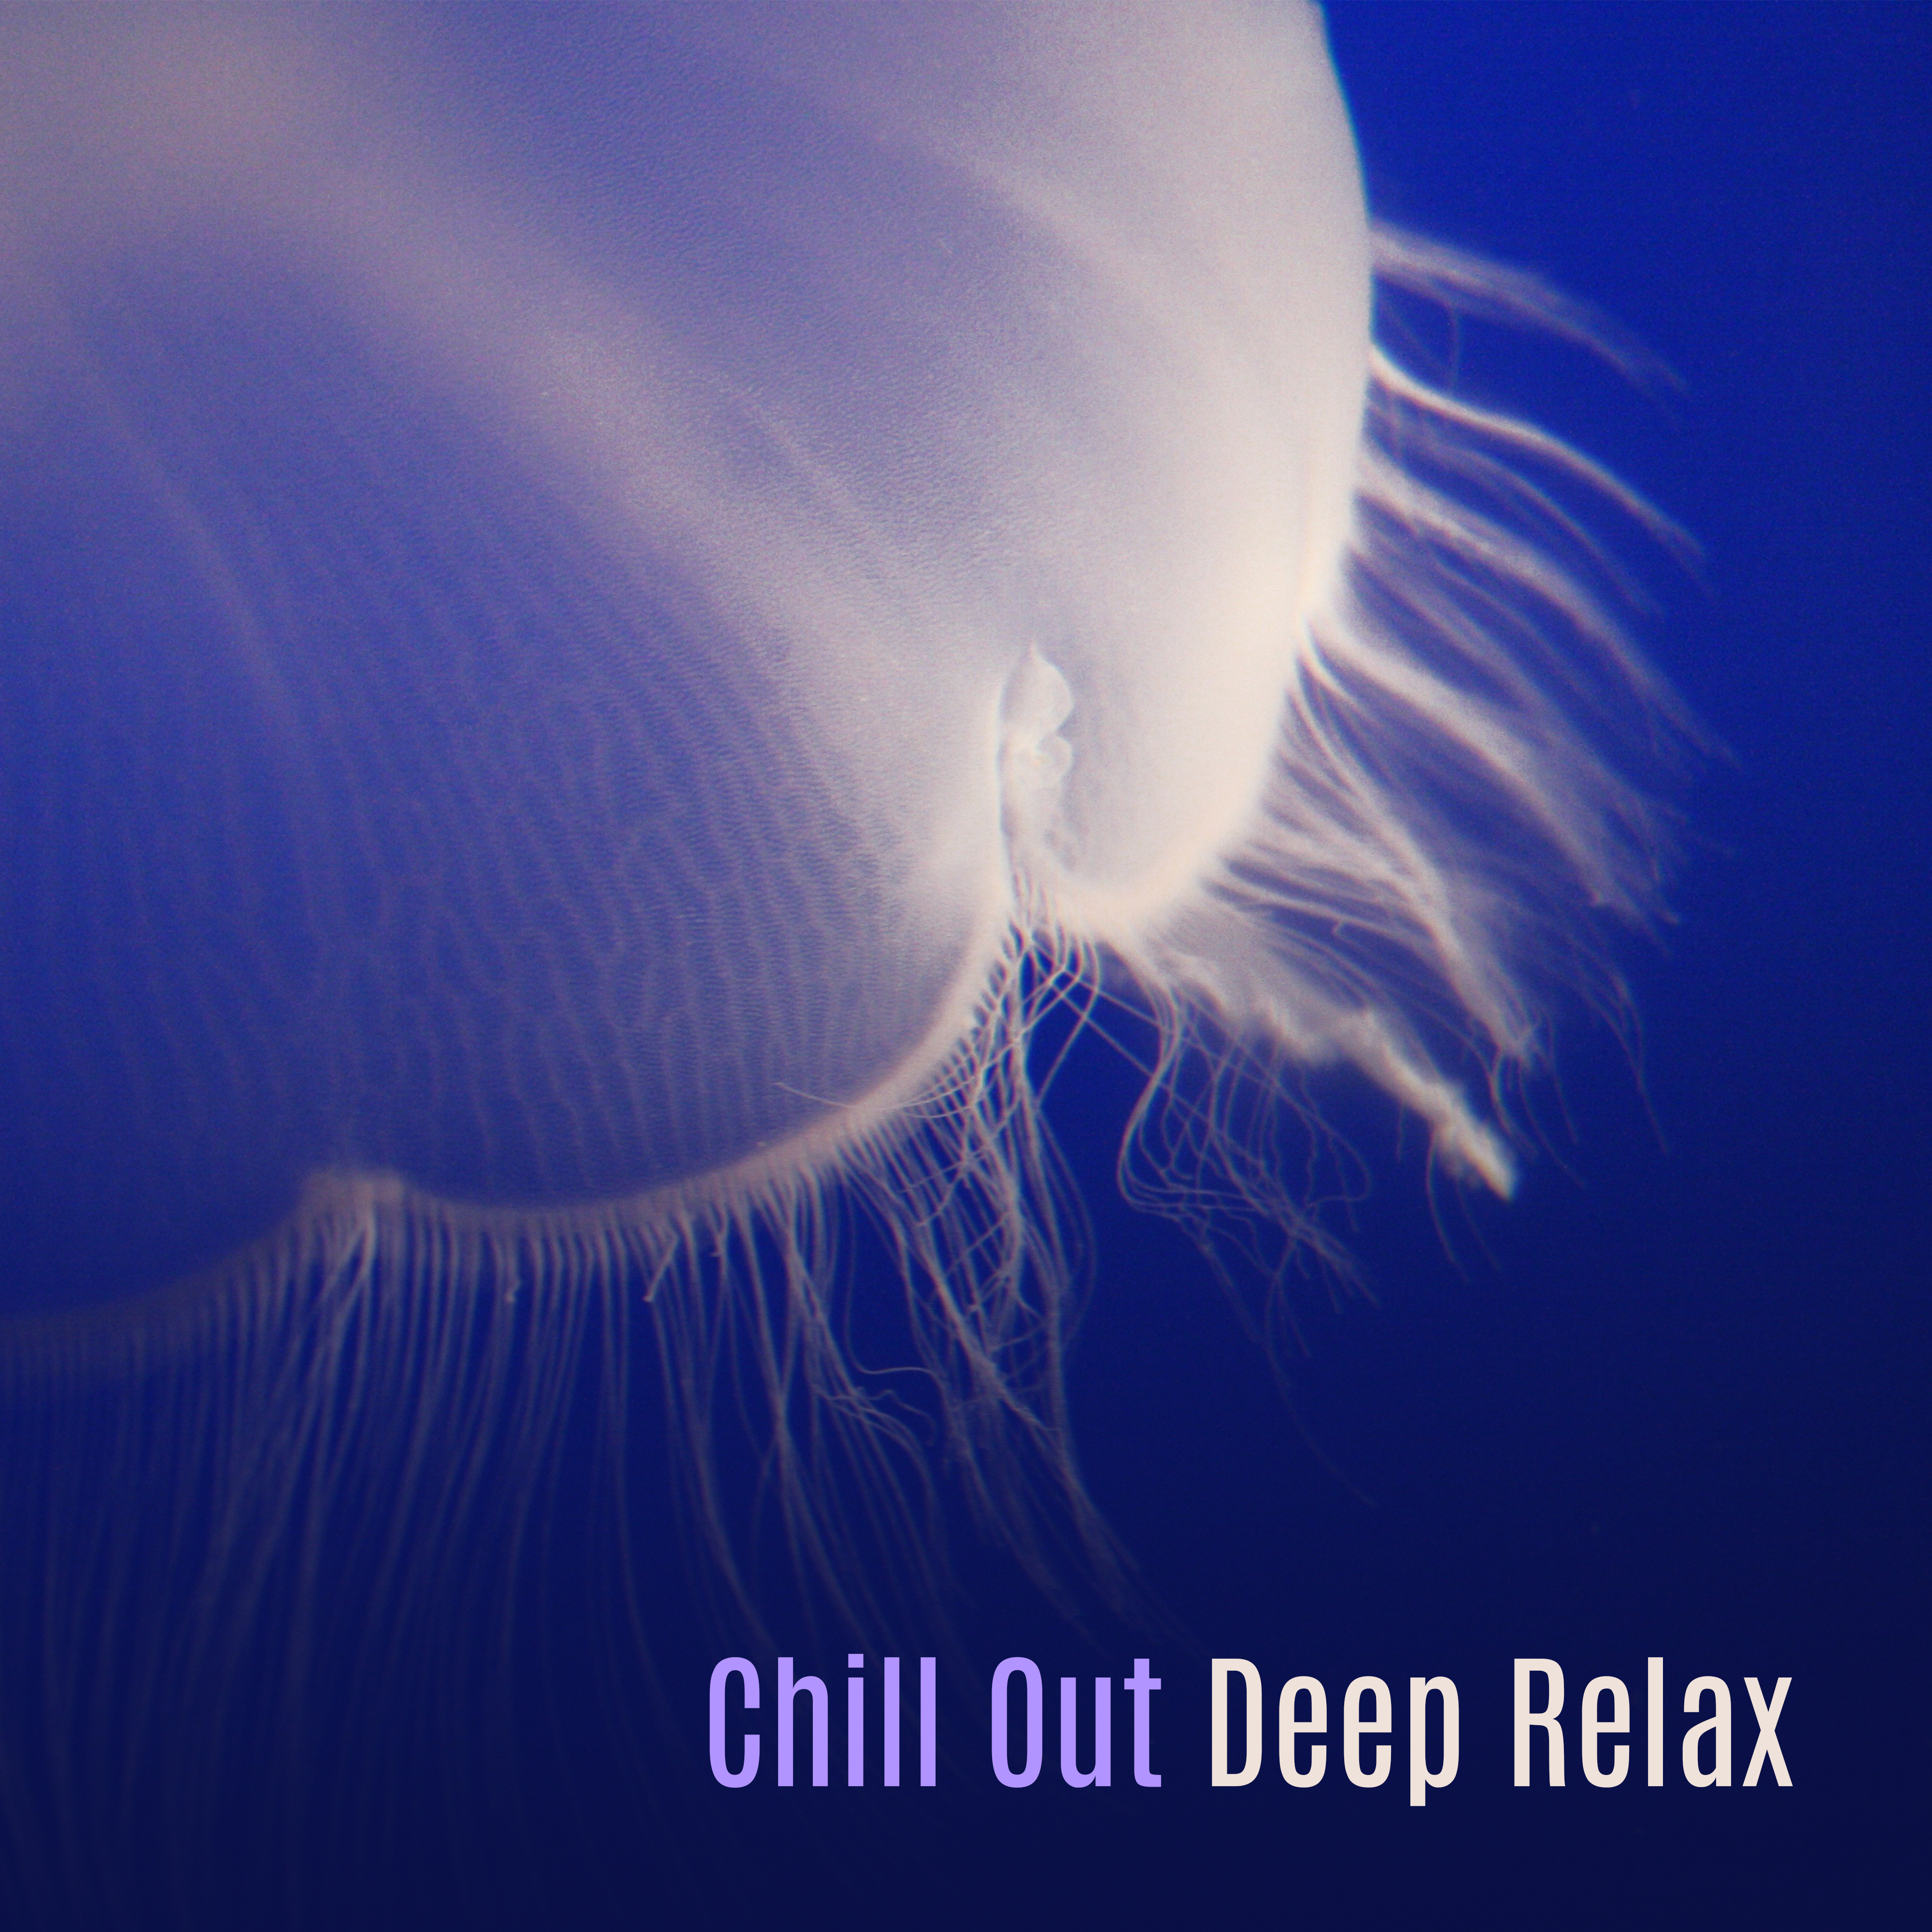 Chill Out Deep Relax  Calm Chill Out Music, Rest a Bit, Peaceful Waves, Summer Chill Vibes